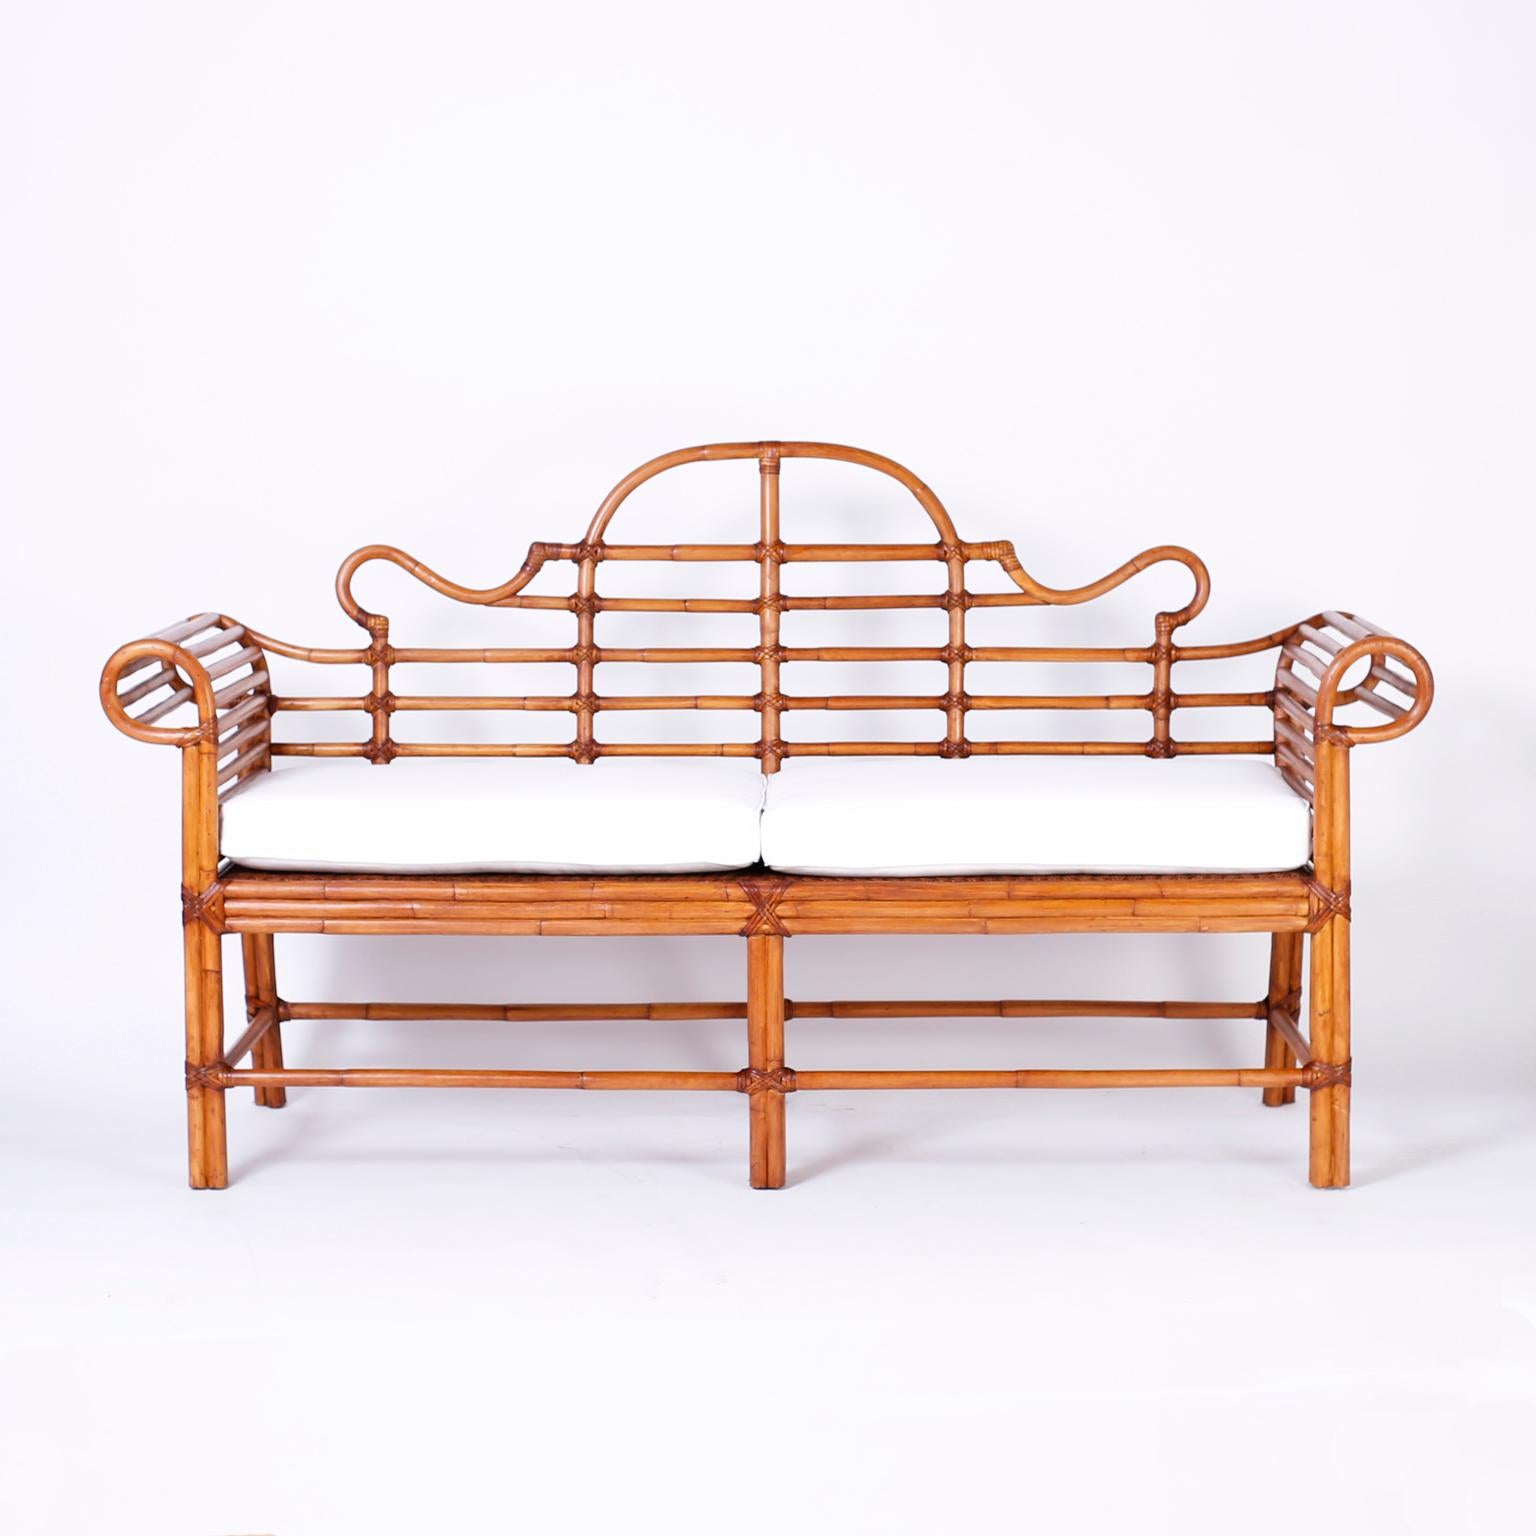 British colonial style bamboo and bent bamboo settee with reed wrapped joints, hand caned seat, and a casual elegant form.